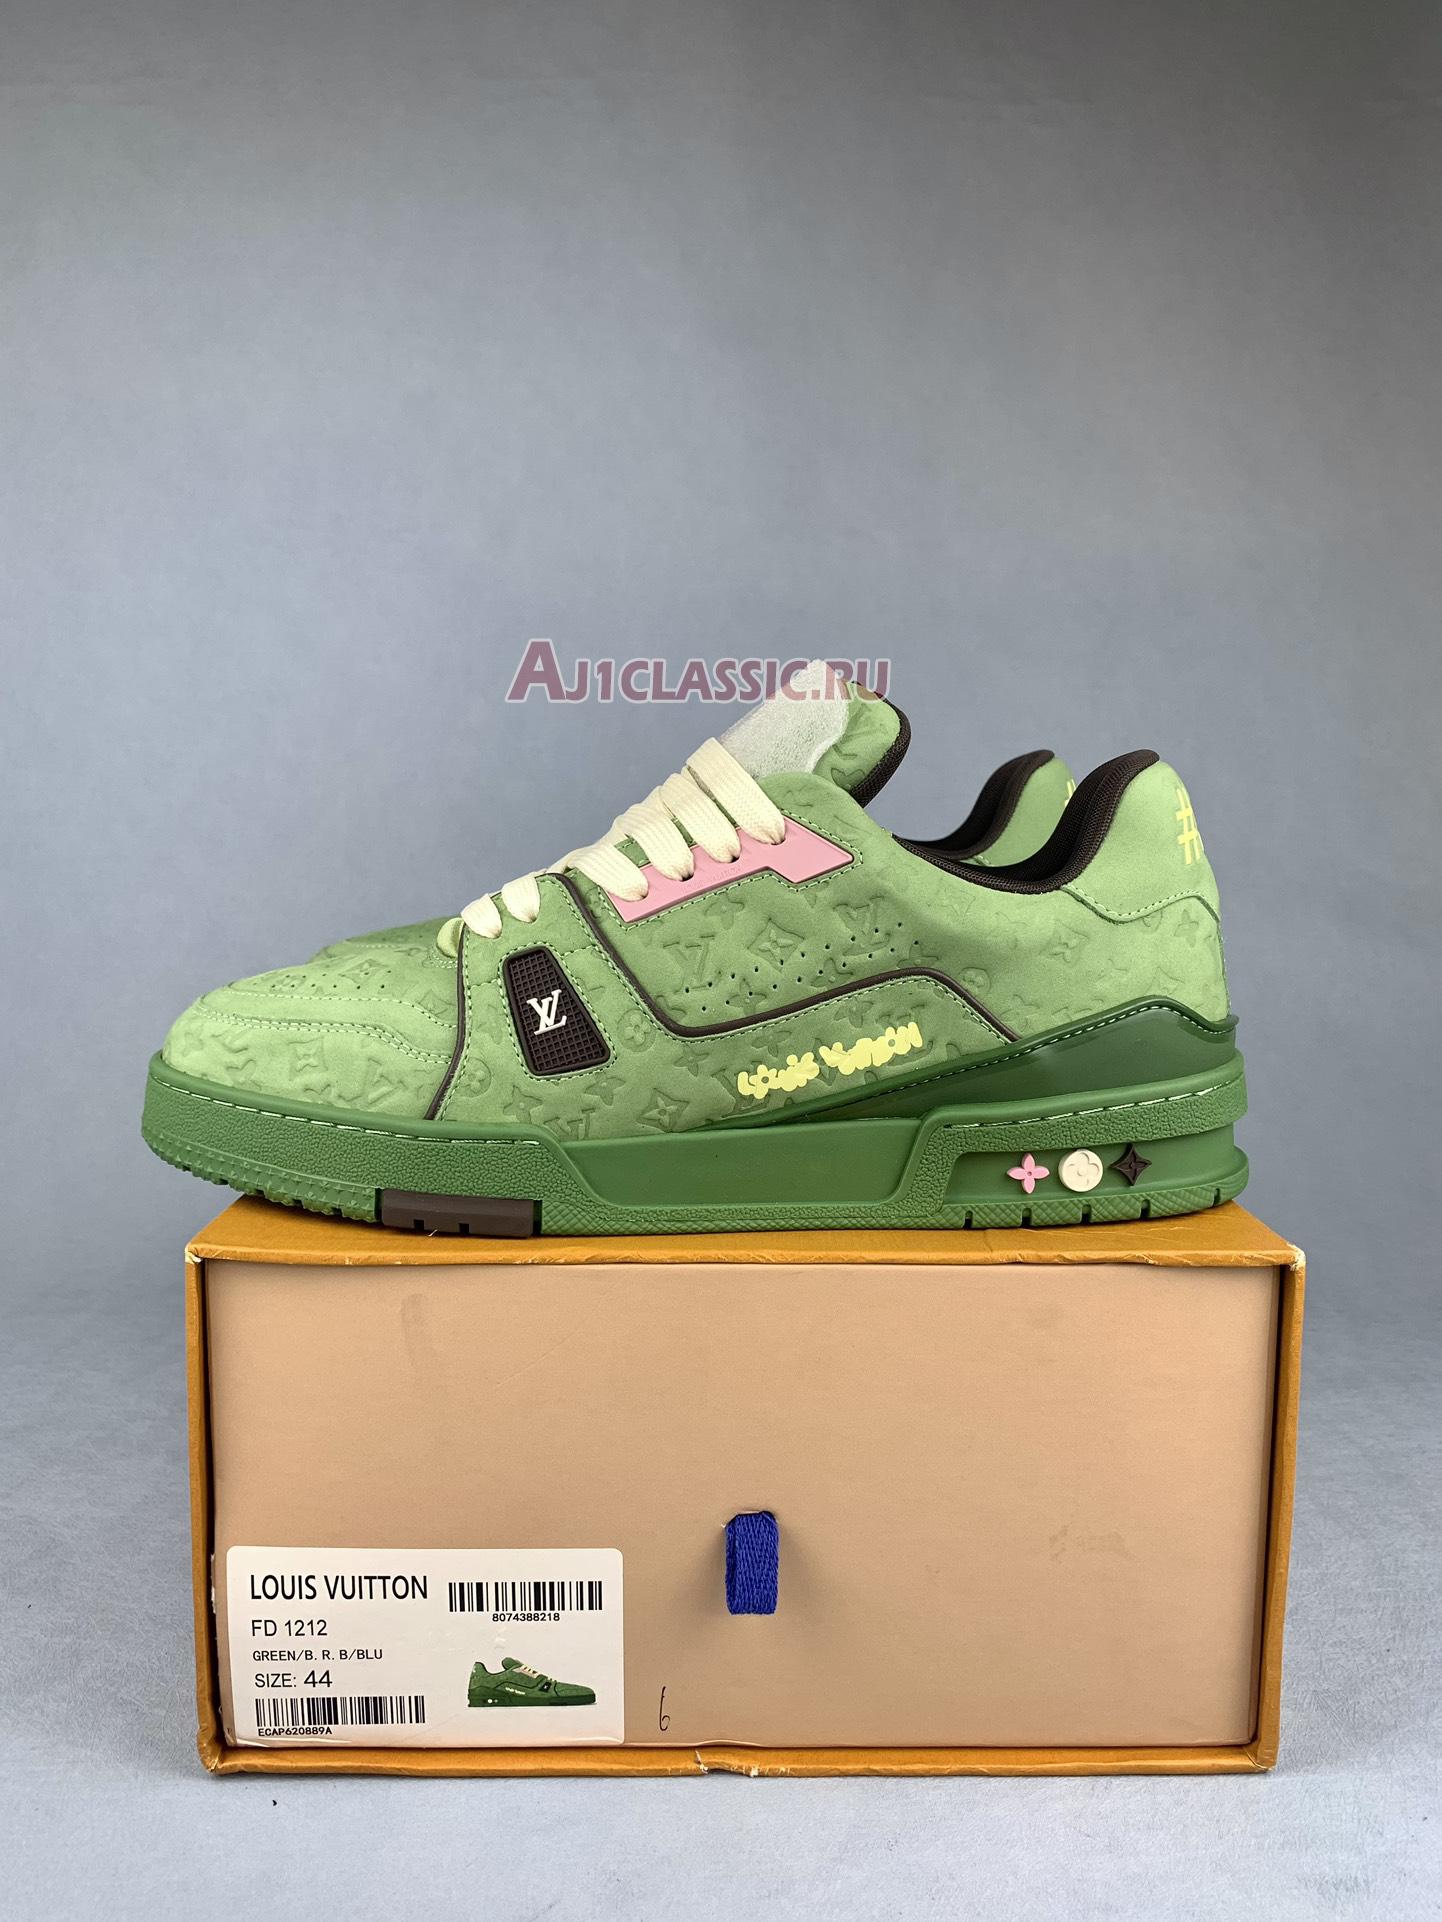 Louis Vuitton by Tyler The Creator LV Trainer "Green" 1ACR6C